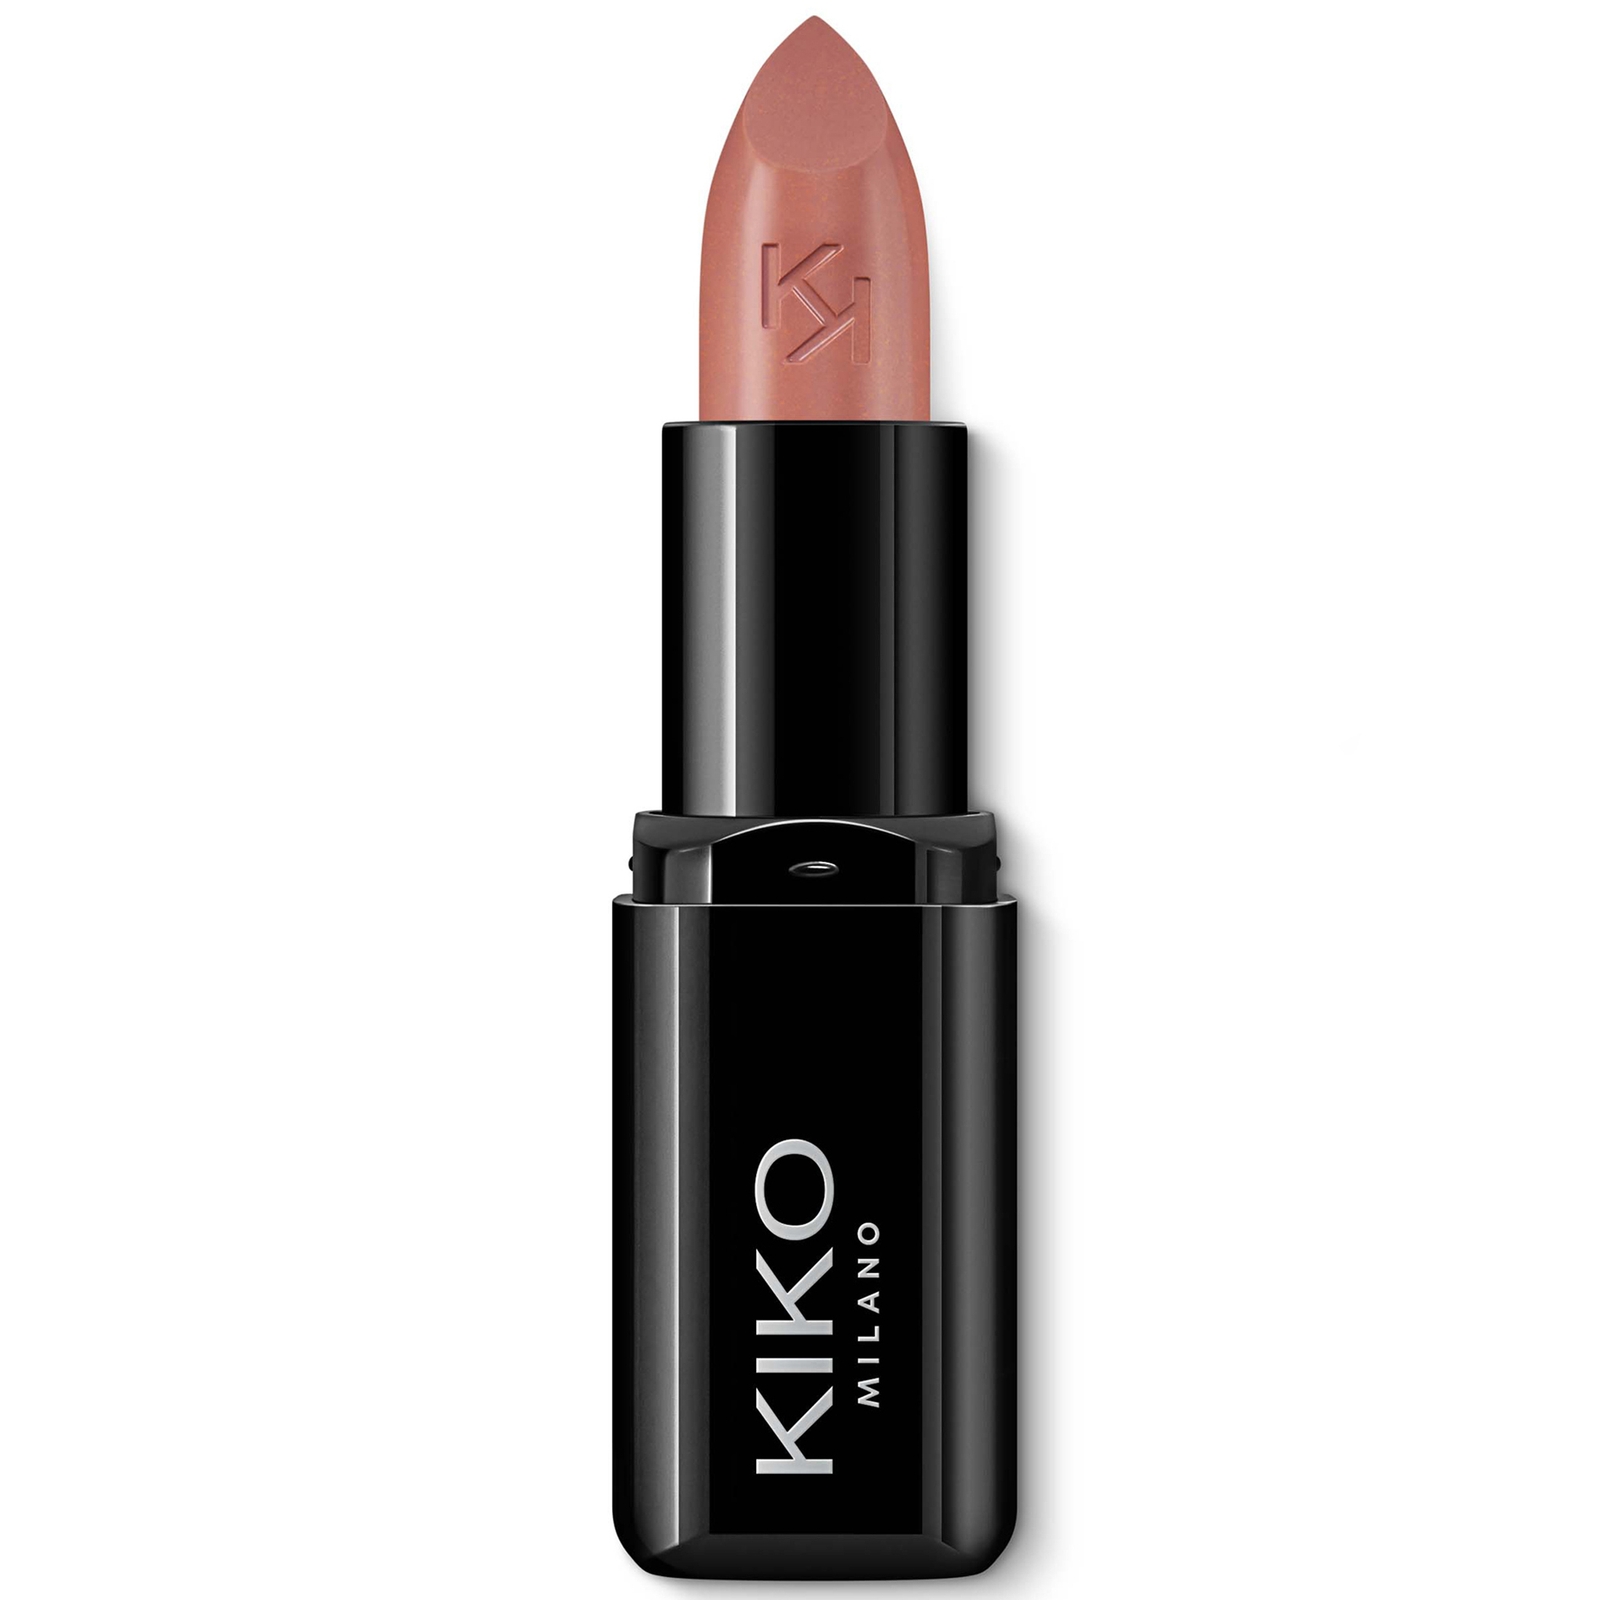 KIKO Milano Smart Fusion Lipstick 3g (Various Shades) - 404 Rosy Biscuit